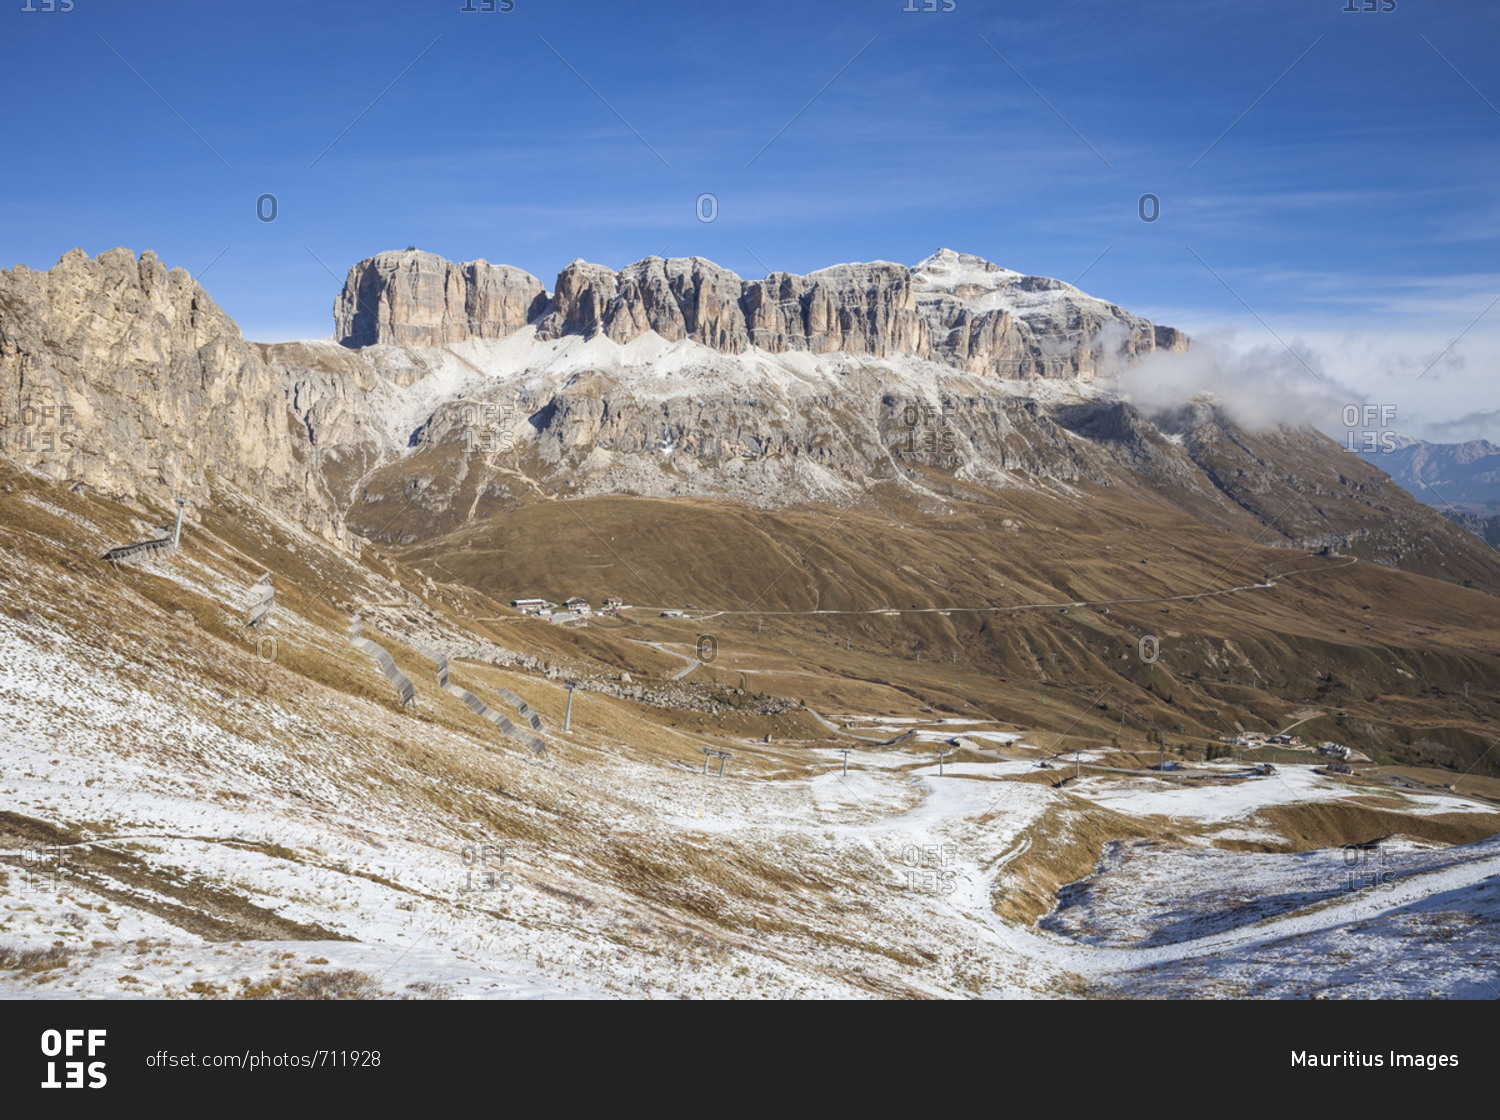 The Sella Group, on the right site the highest summit of the Group of Piz Boe (3152 m), view to the Pordoi (mountain), strada statale 48 delle Dolomiti, Dolomites, Border of South Tirol-Tentino-Belluno, Italy, Europe